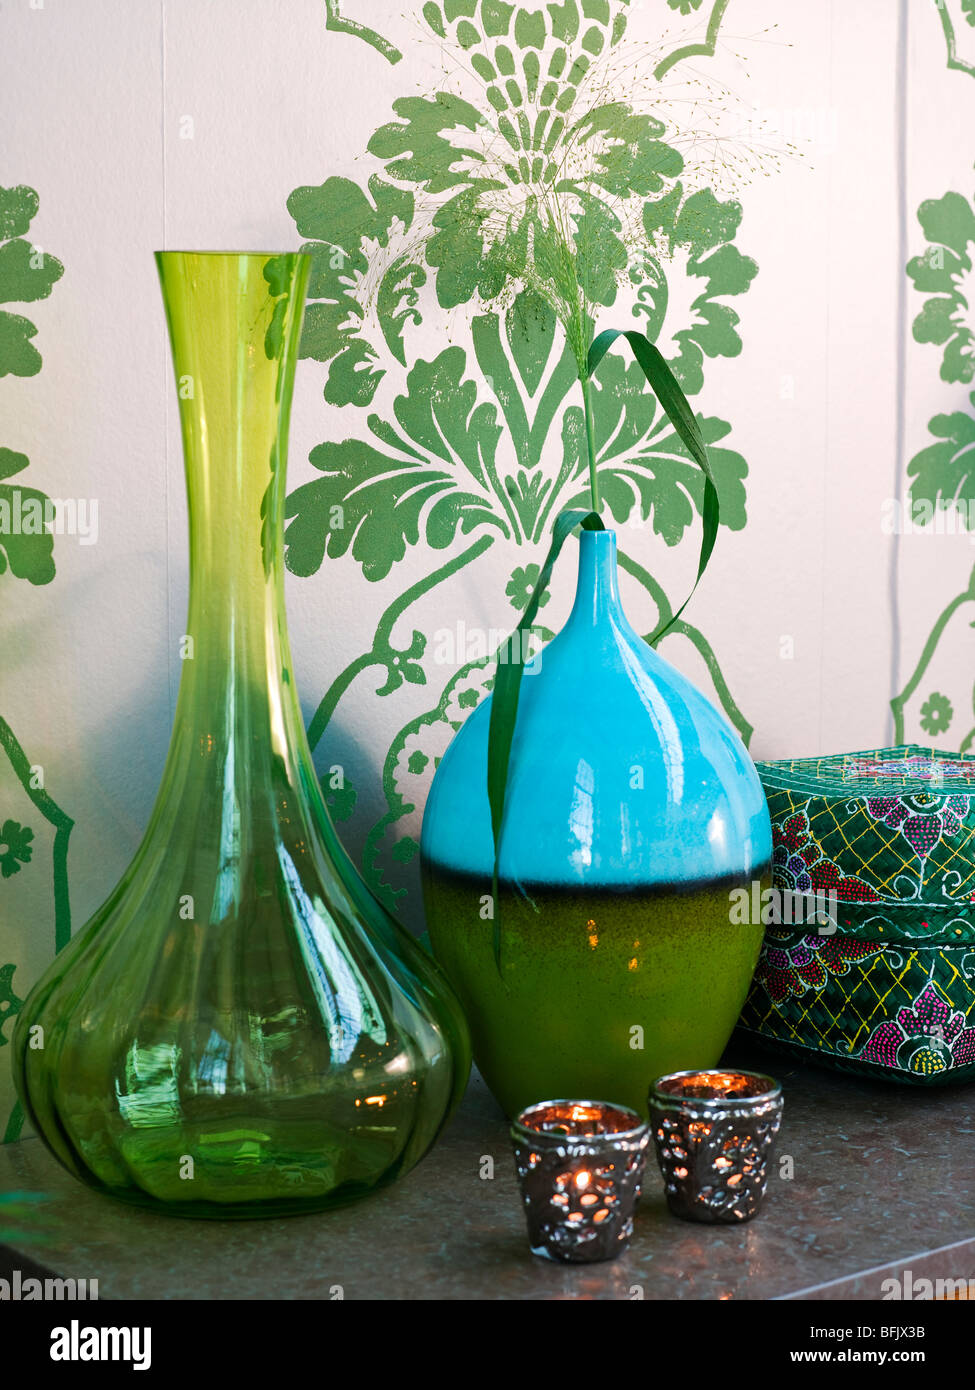 Vases in different shapes. Stock Photo